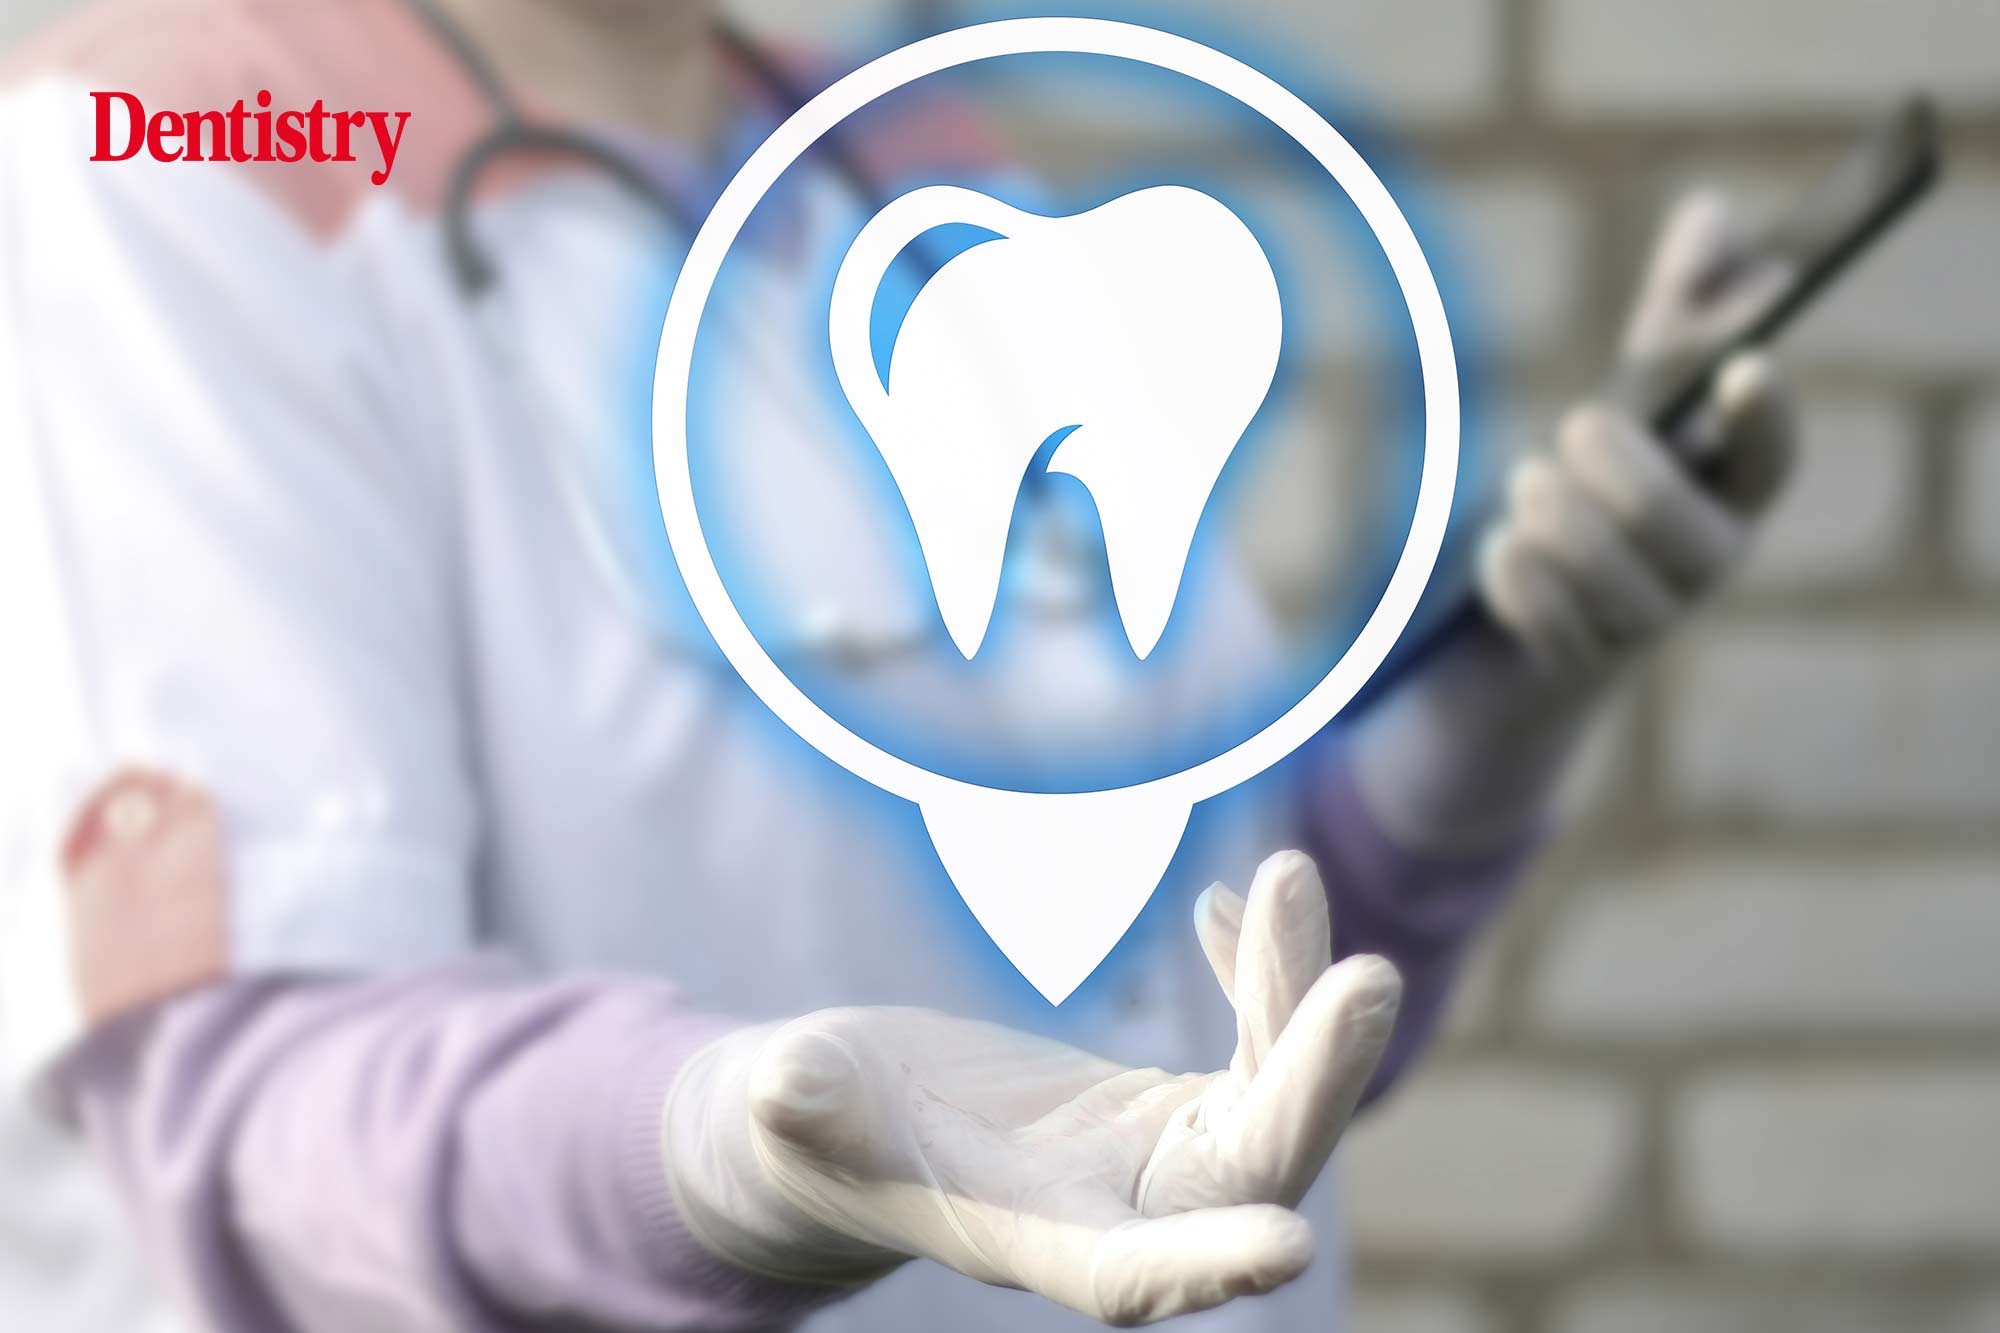 What are the market predictions for dentistry in 2023?